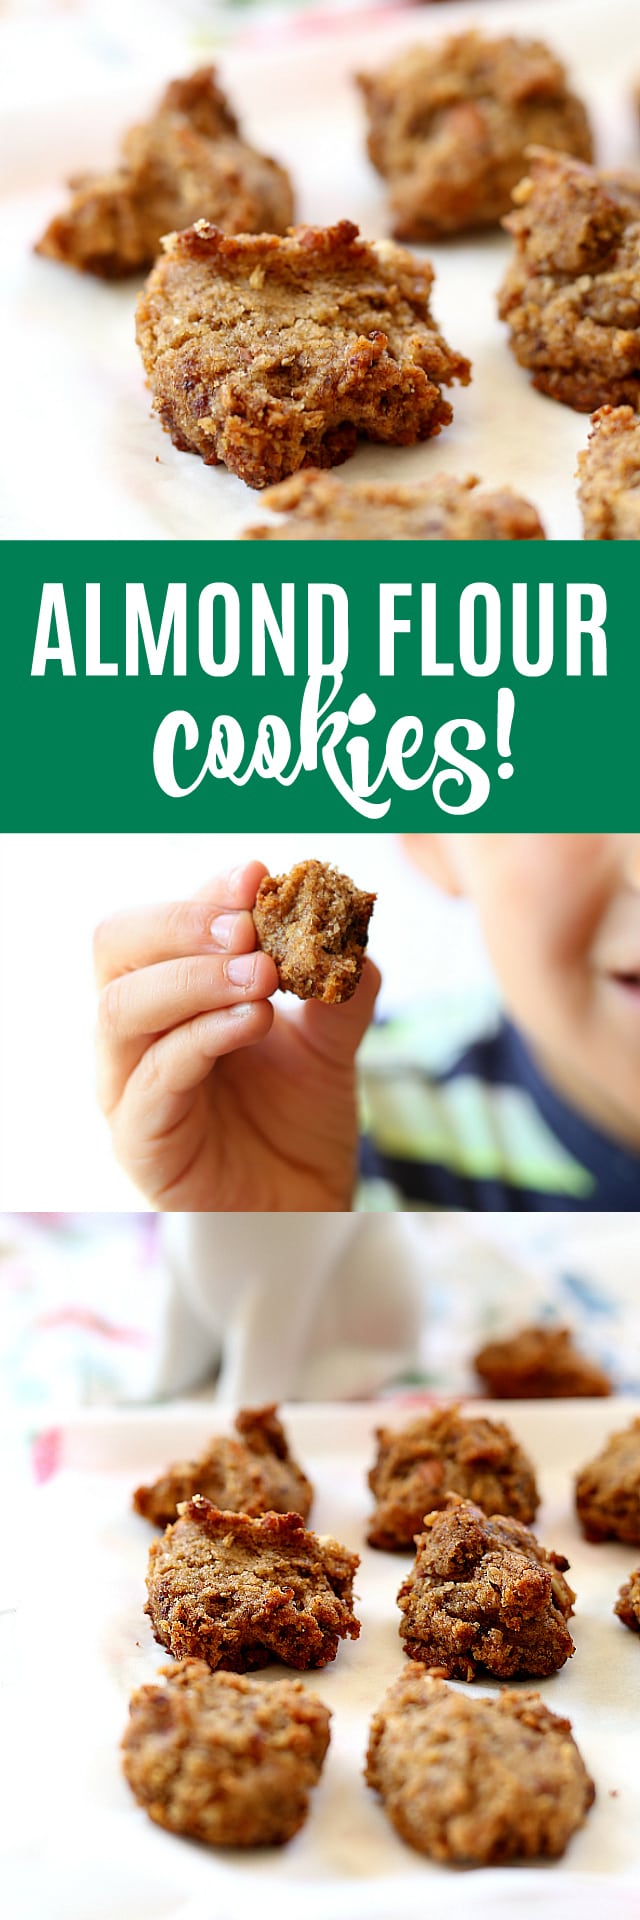 Miniature vegan almond meal treats perfected into bite size cookies! These grain free almond flour cookies naturally soothe a sweet tooth and are packed with healthy fats and nutrients!